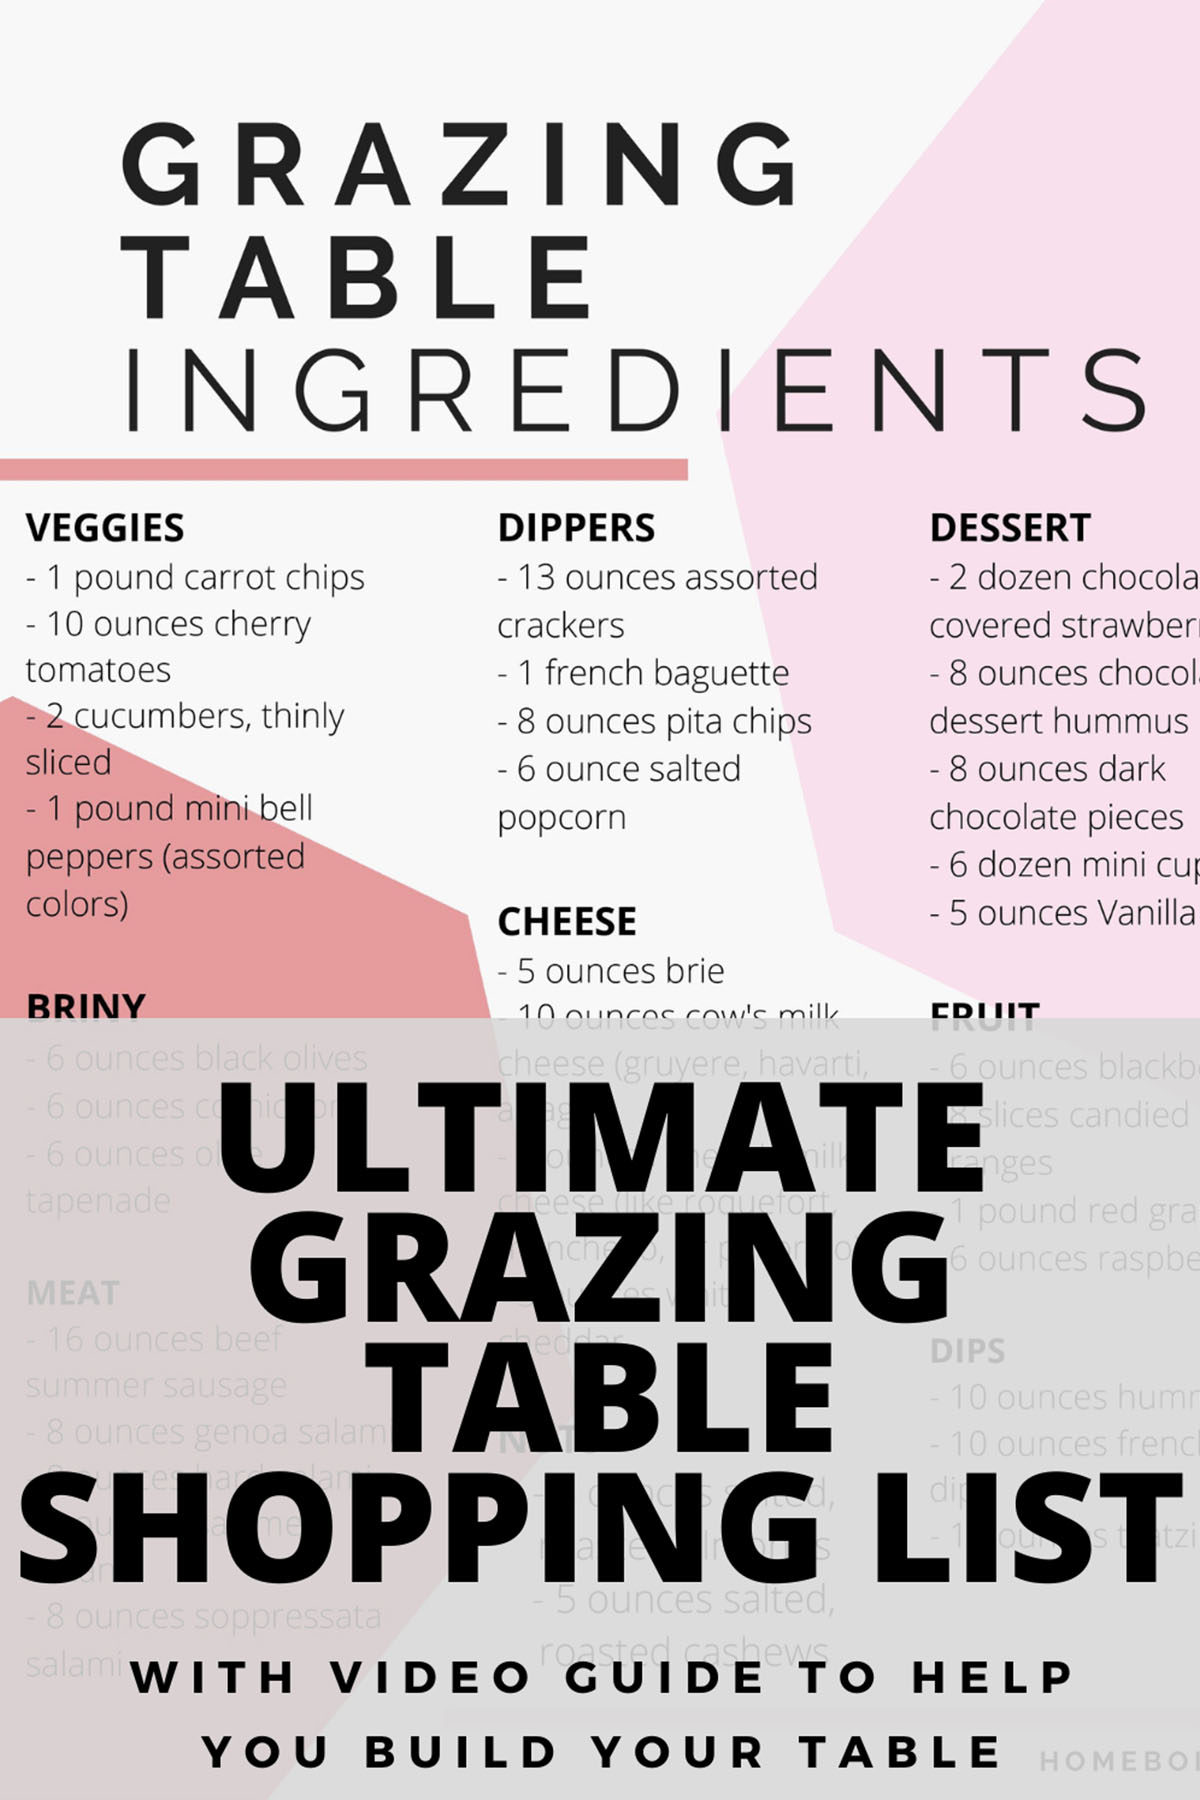 grazing table shopping list.